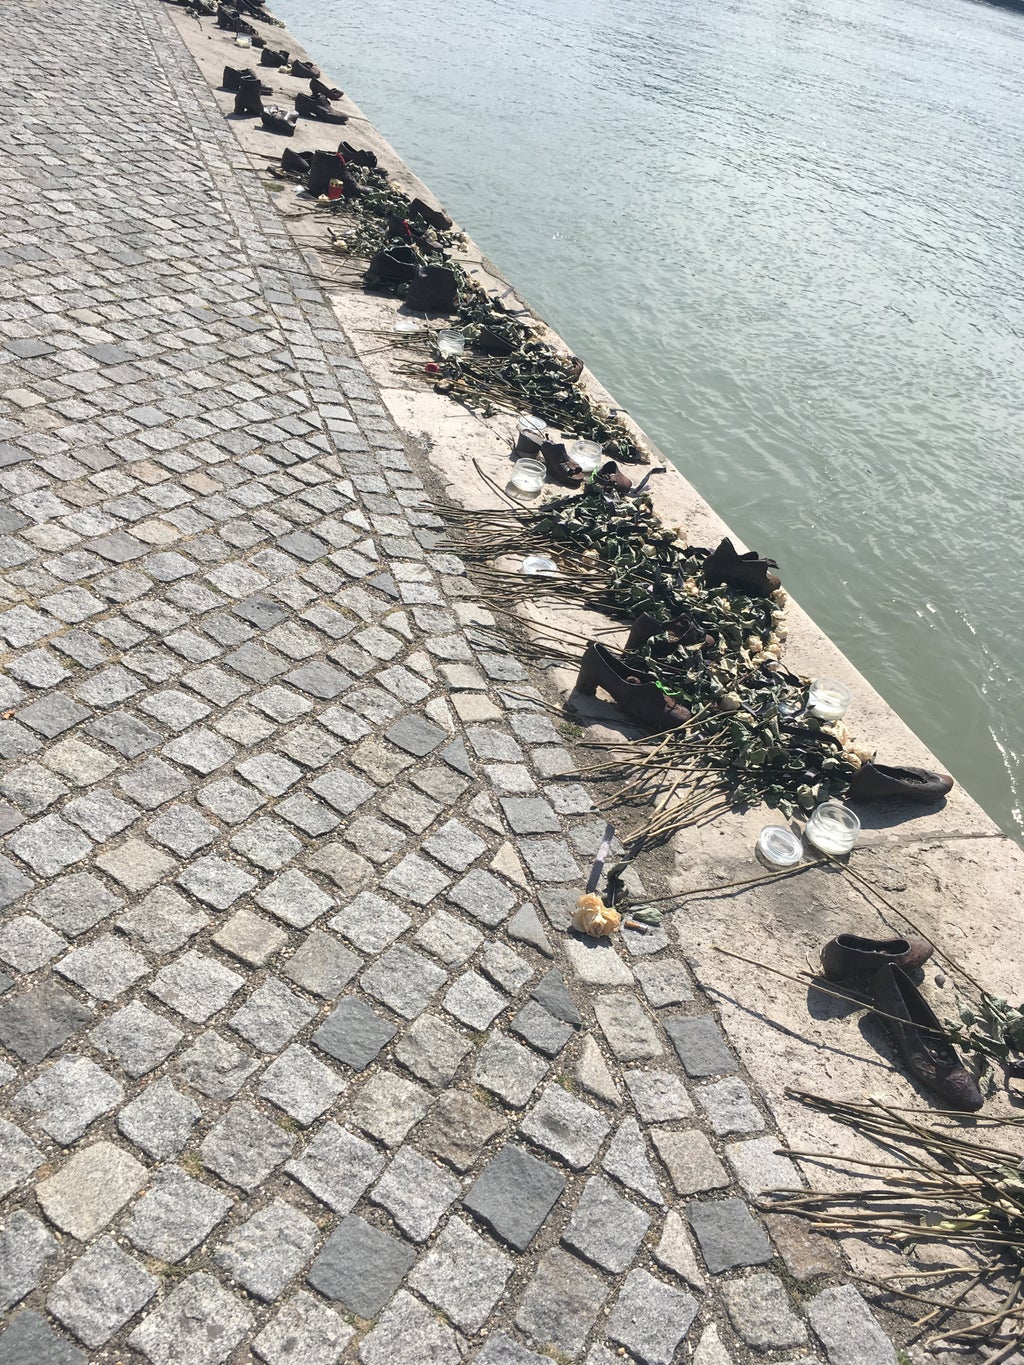 Boots sitting along the Danube to represent those who passed there, Budapest, Hungary